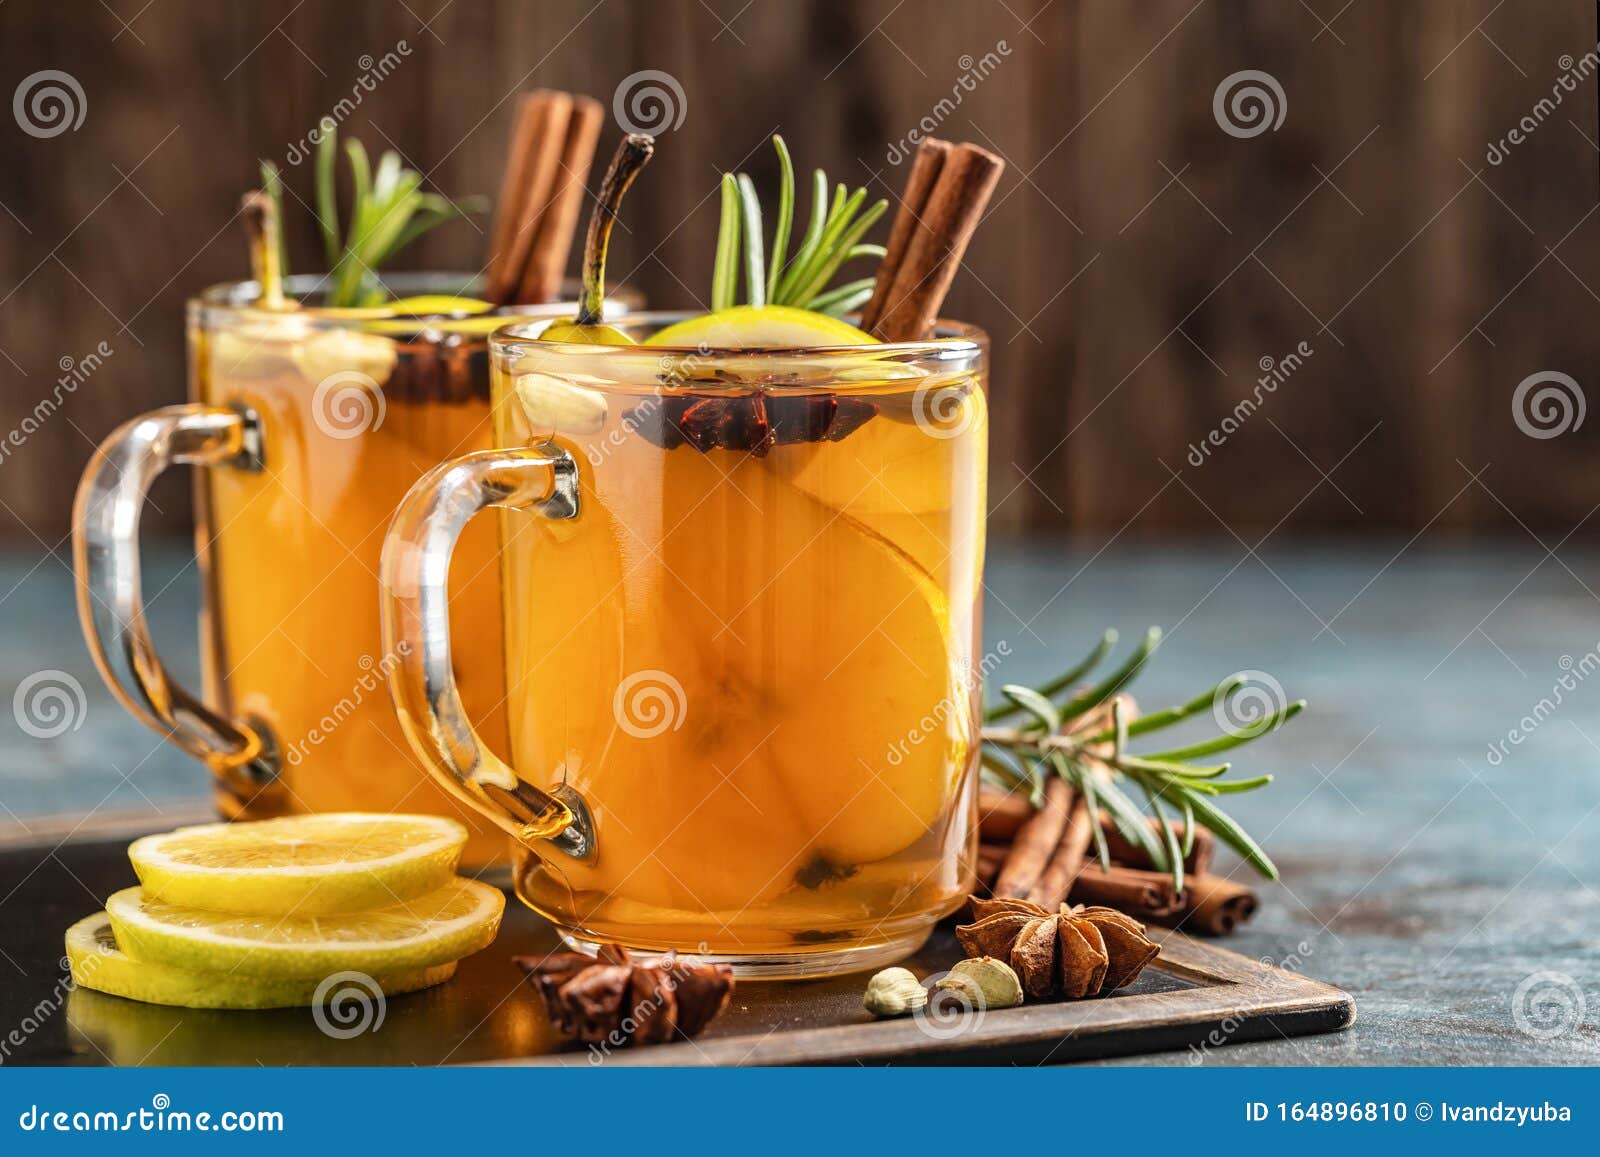 hot toddy. mulled pear cider or spiced tea or grog